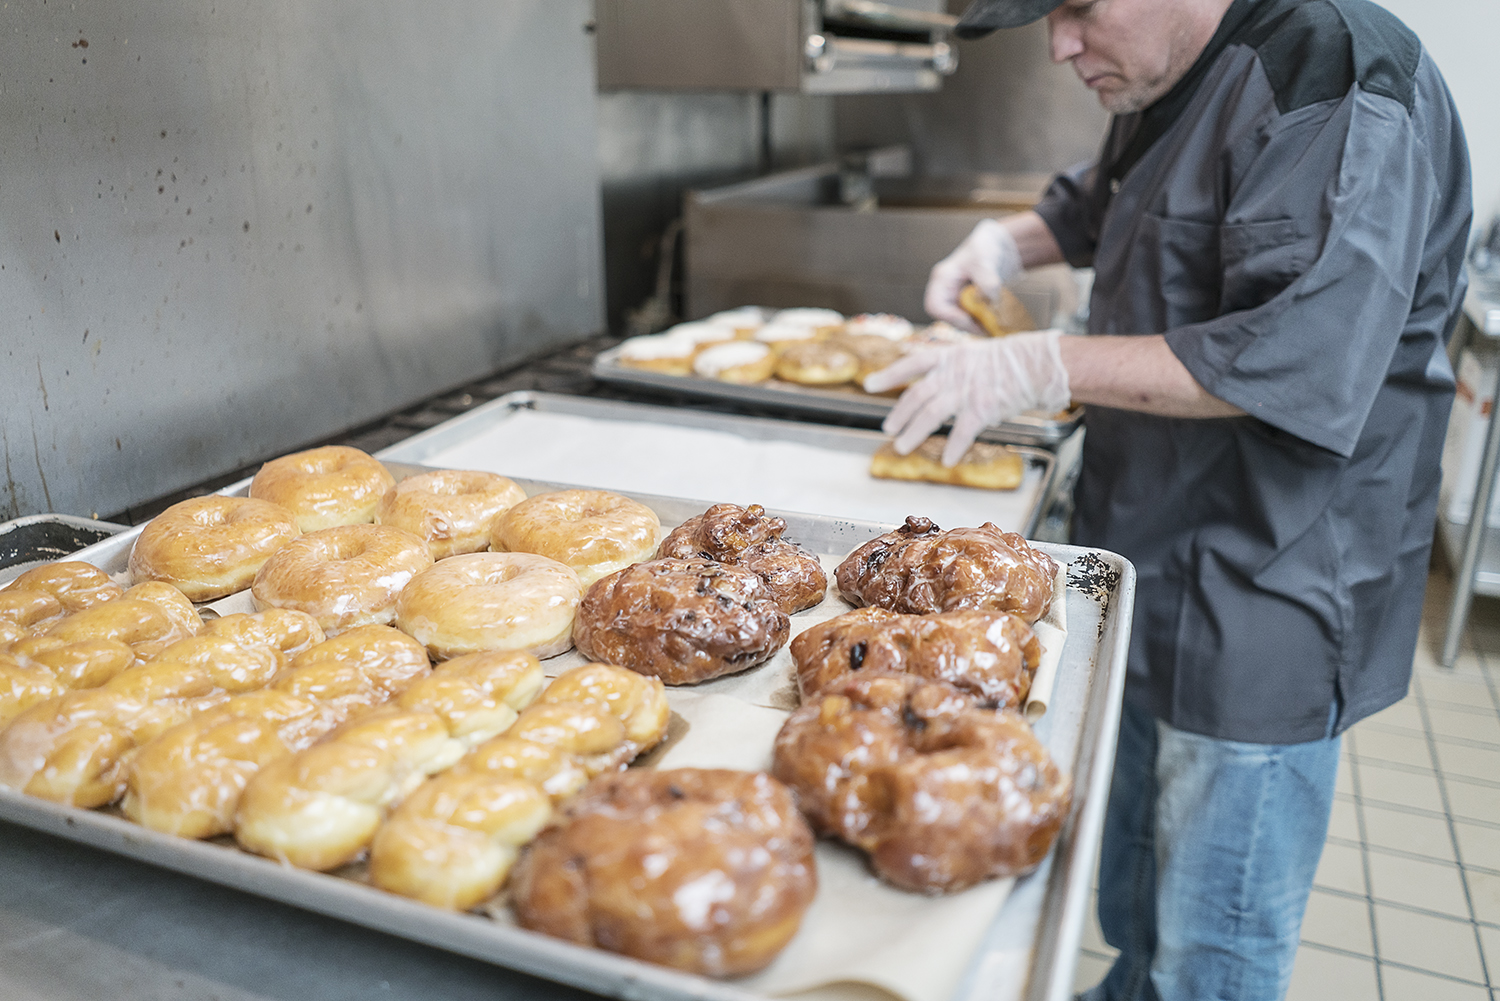 Bruce Sowles, 53, of Flint, transfers donuts to baking sheets before they are delivered to Foster's Coffee in downtown Flint at Blueline Donuts inside of Carriage Town Ministries.